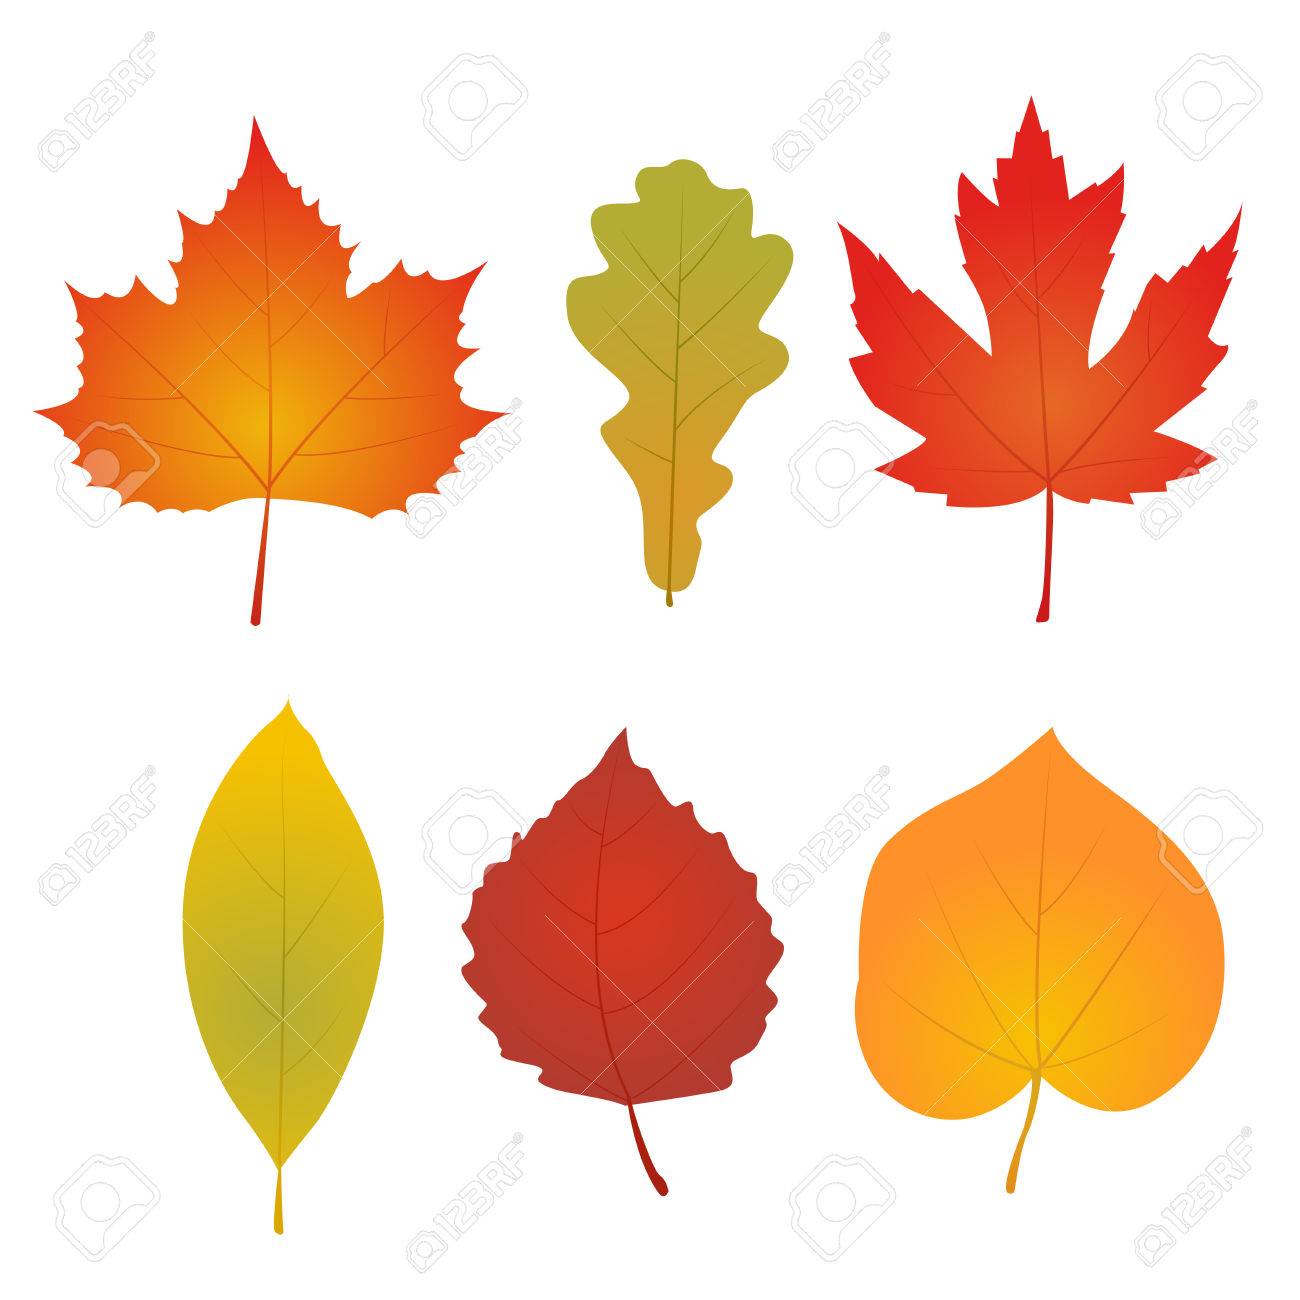 Free Autumn Leaves Clipart simple, Download Free Clip Art on